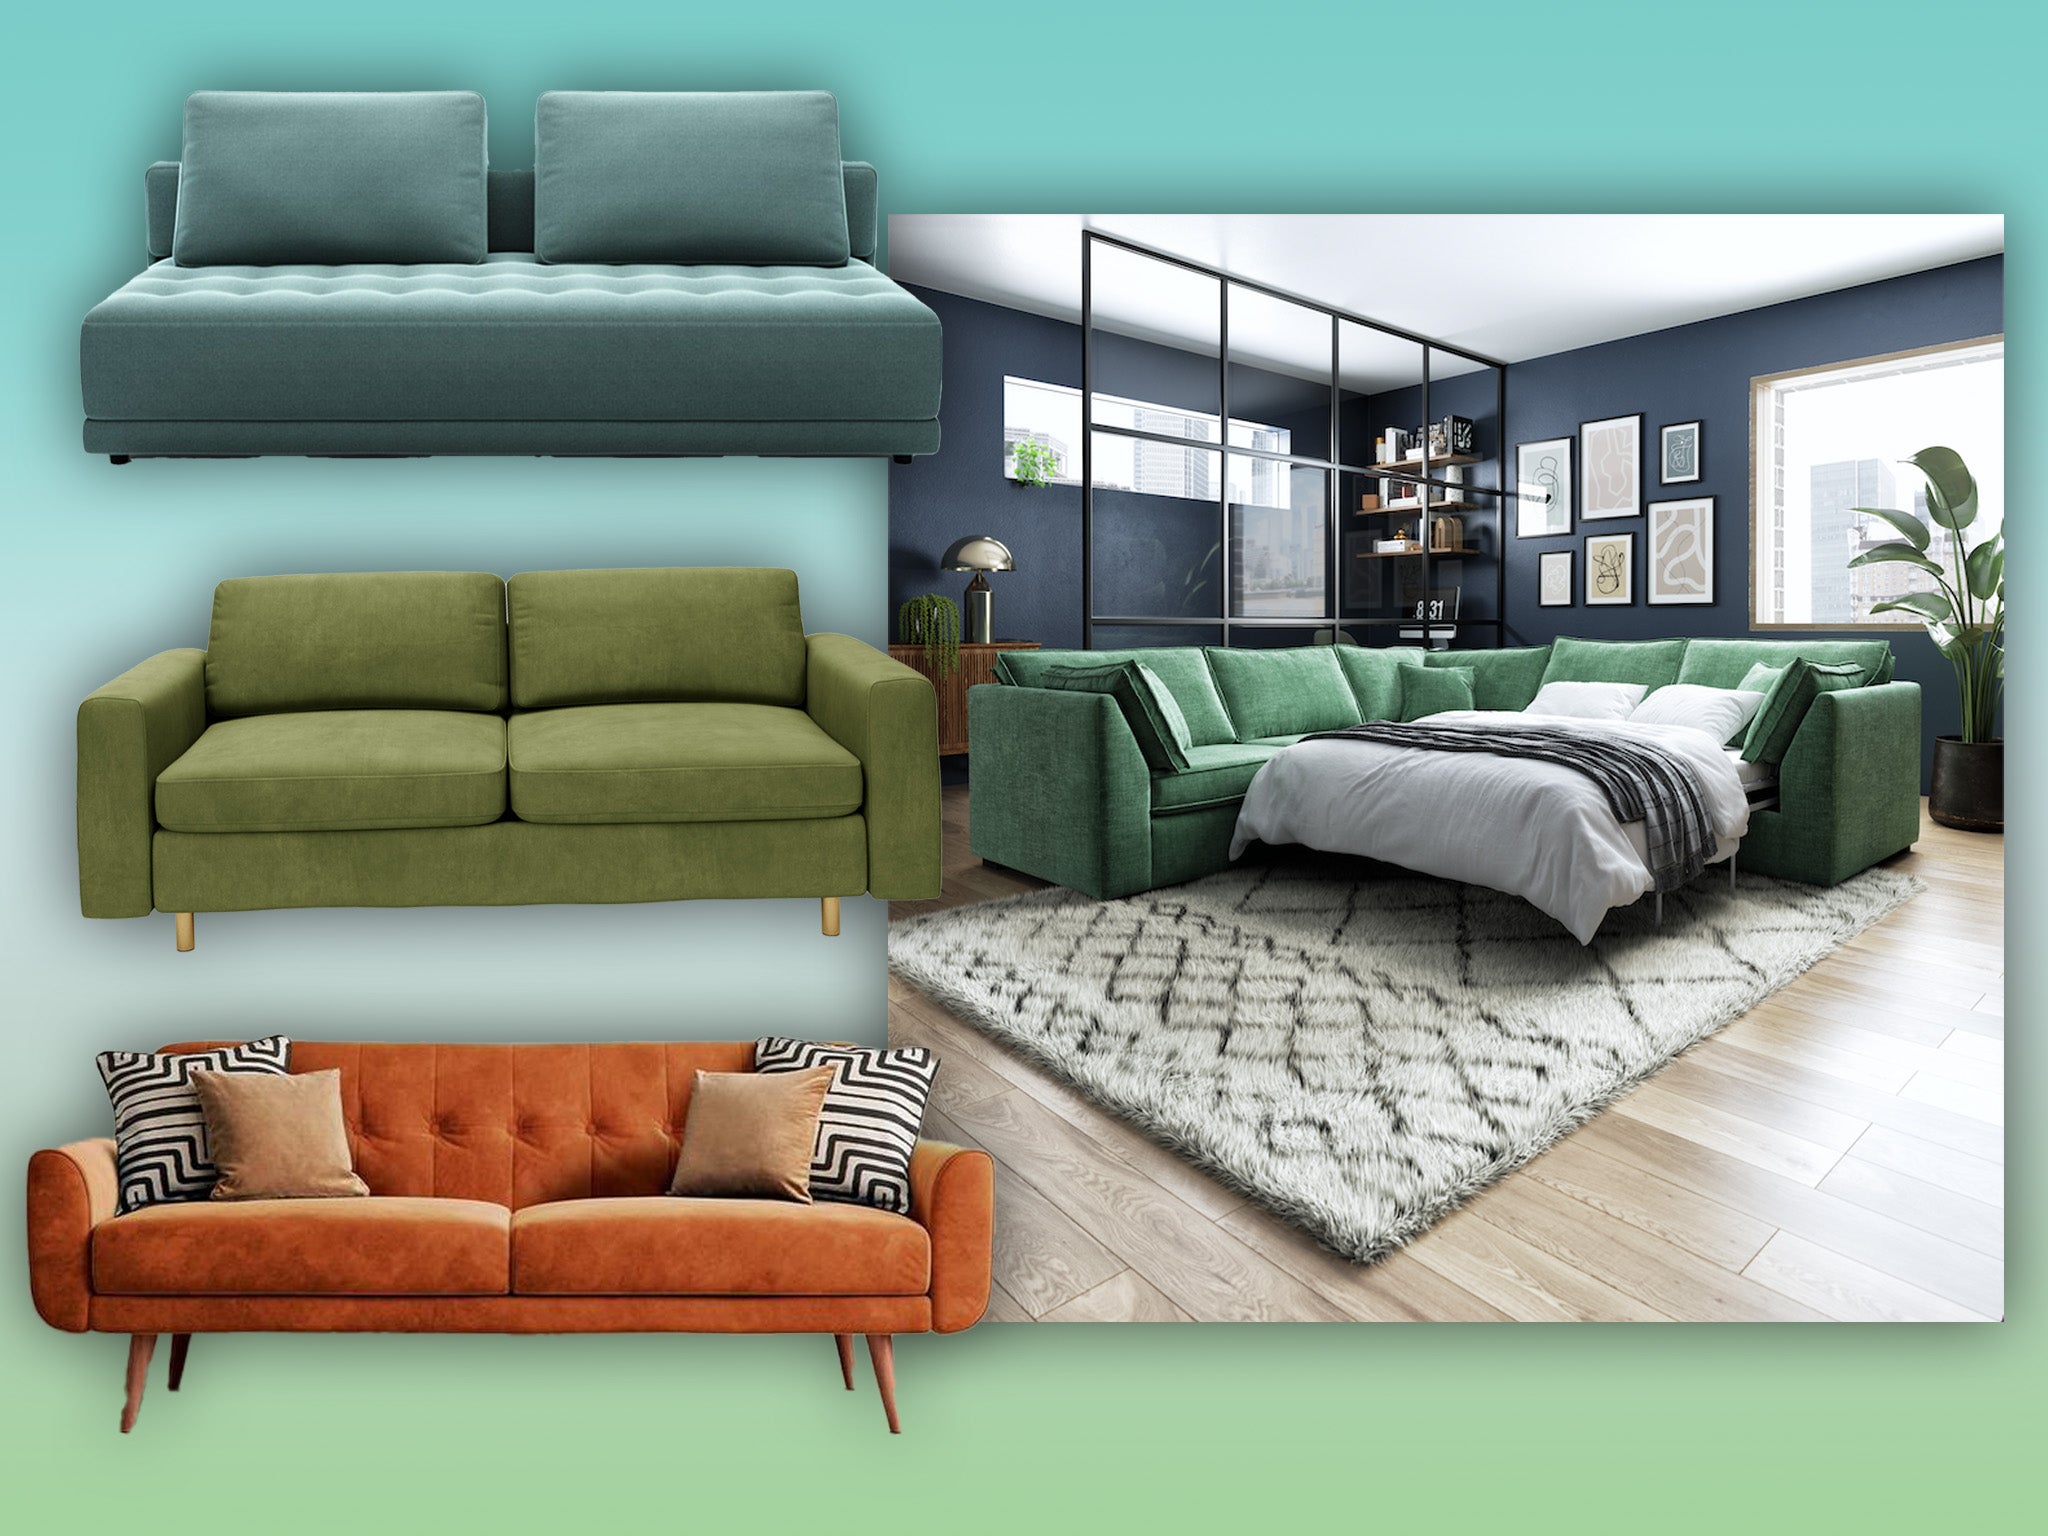 best rated sofa beds